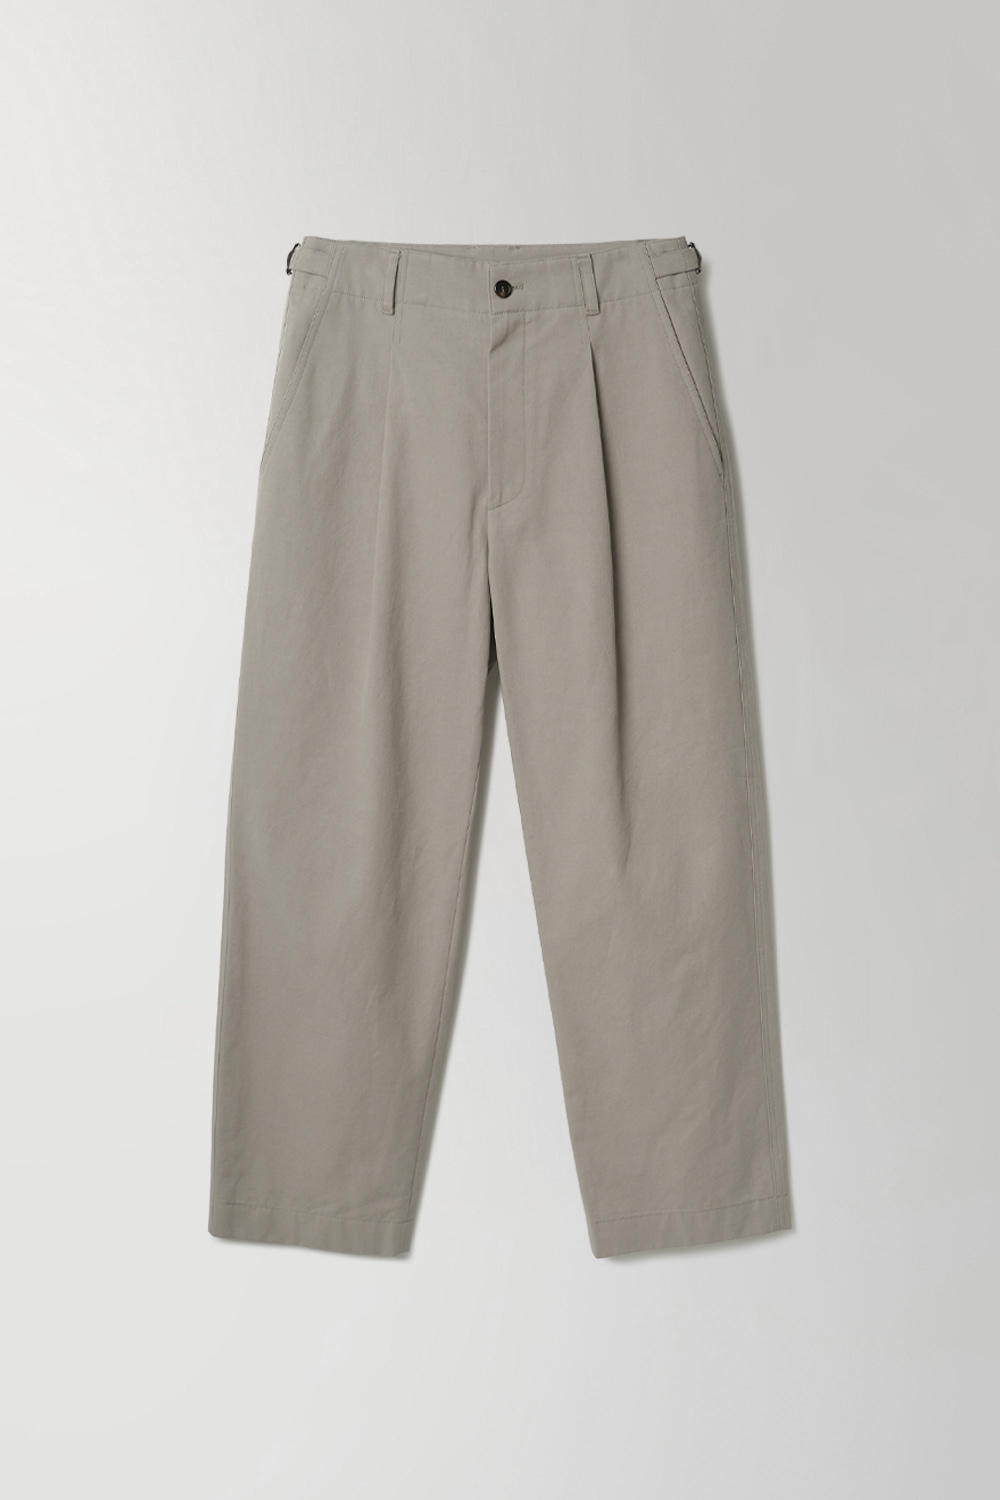 STRUCTURED CHINO PANTS - FROST GREY